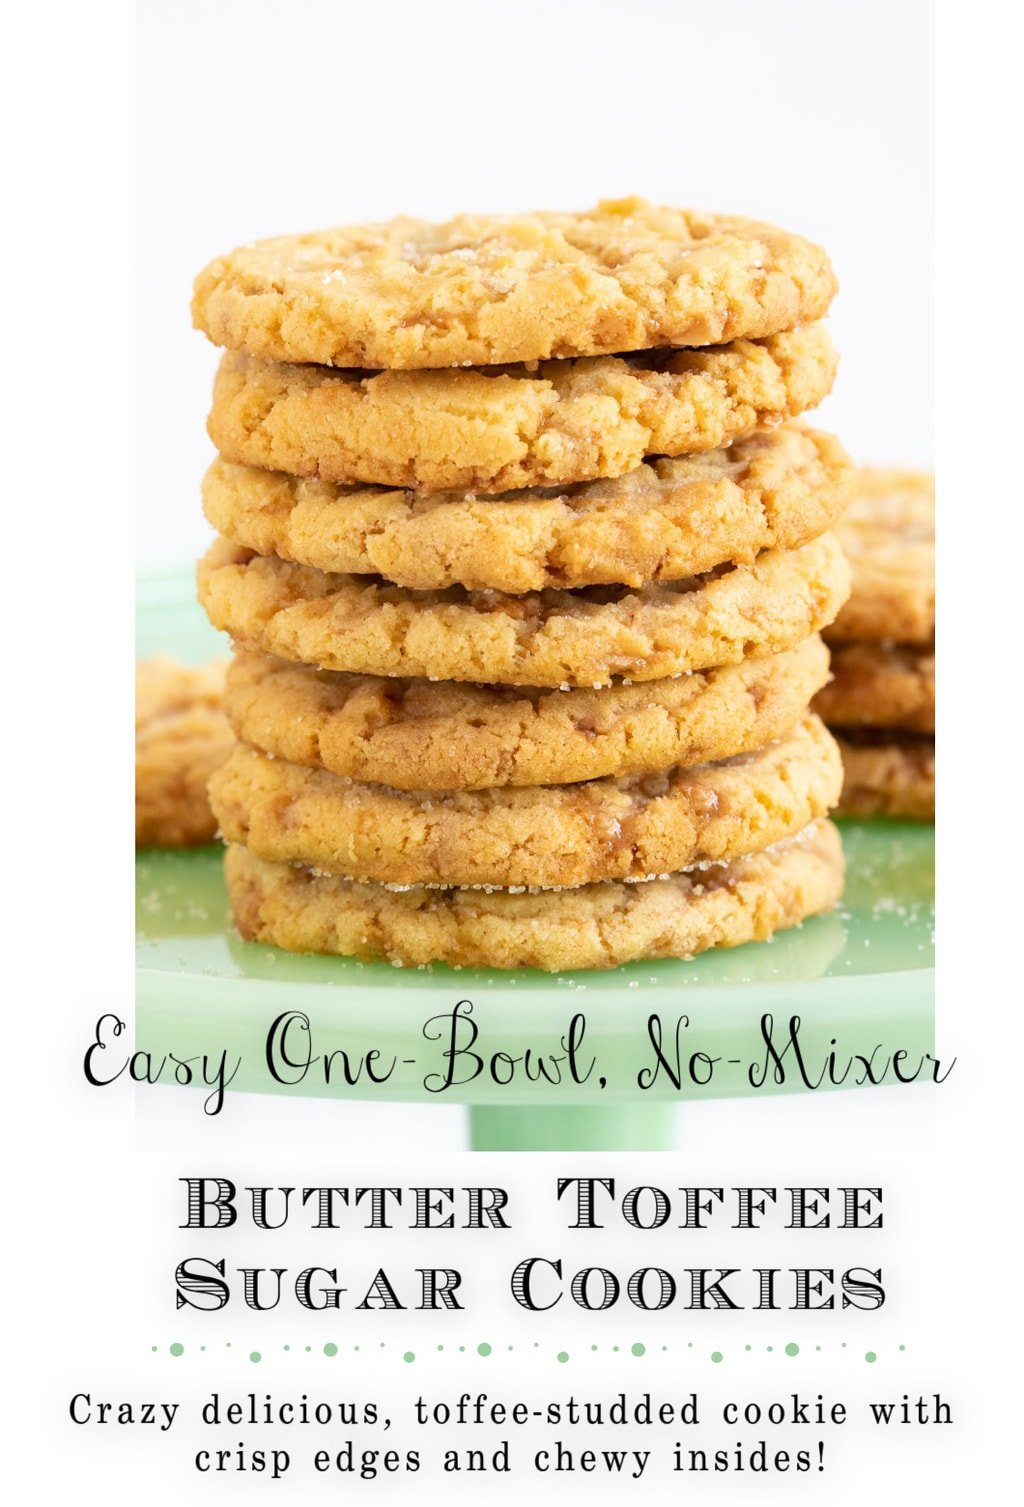 Crinkly Crackly Butter Toffee Sugar Cookies